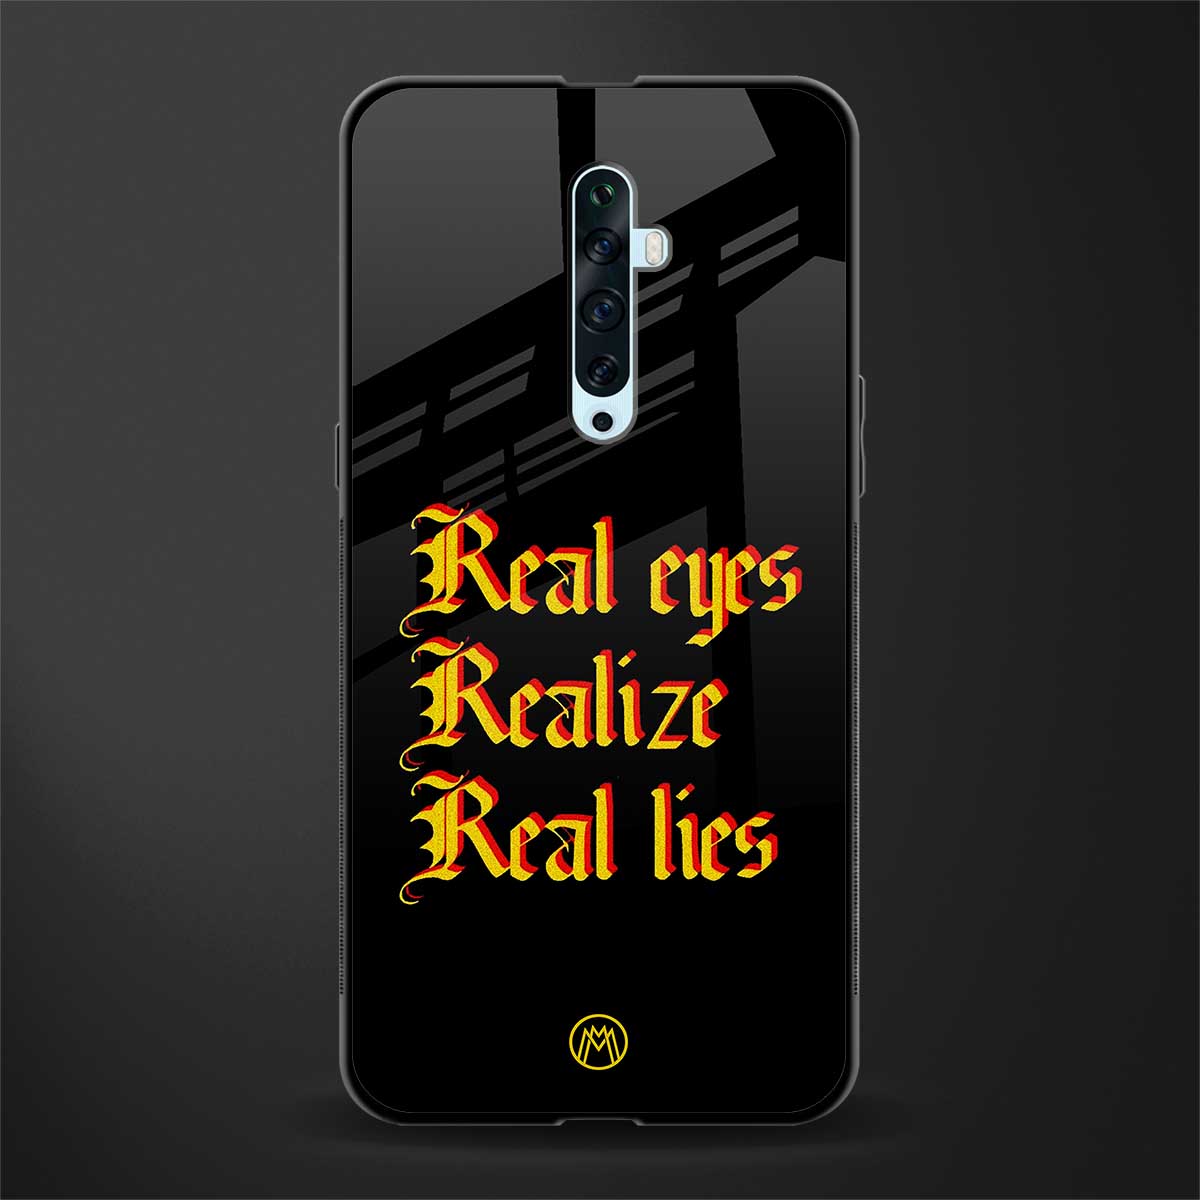 real eyes realize real lies quote glass case for oppo reno 2z image